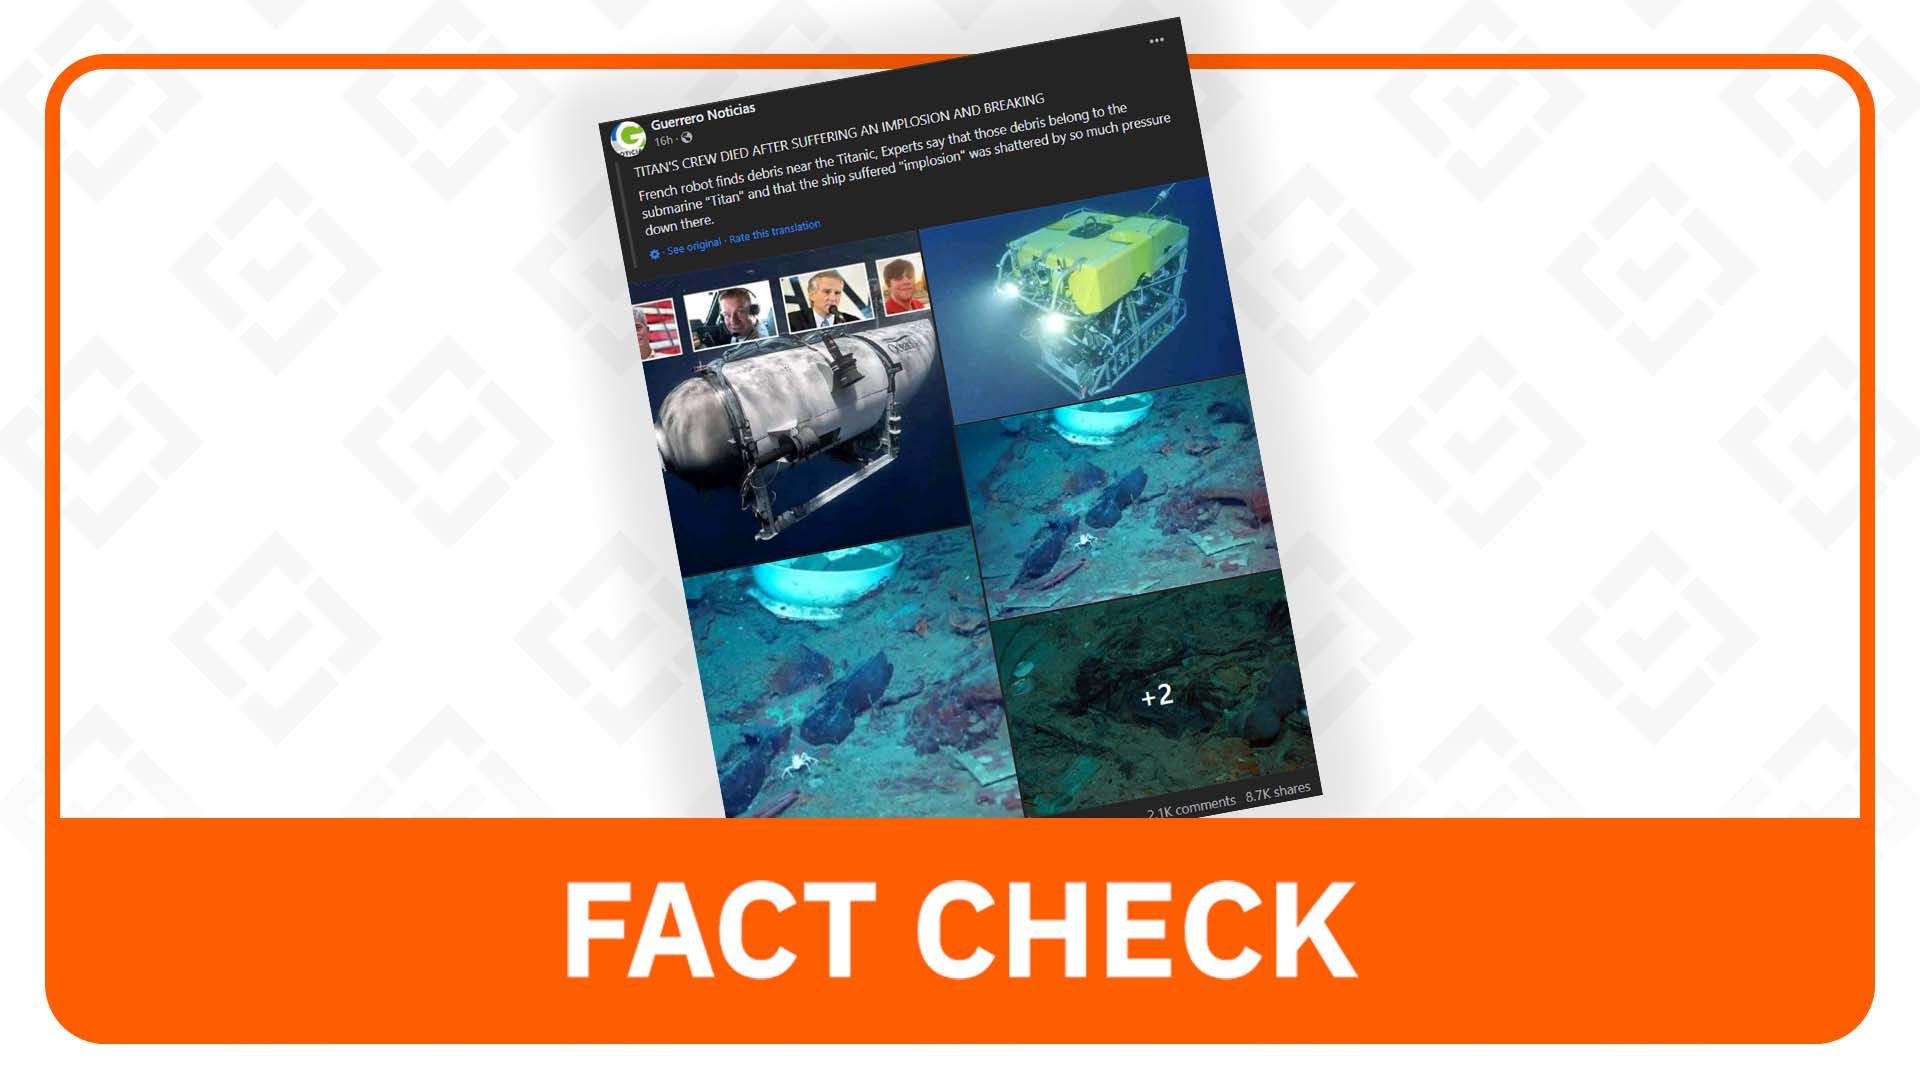 FACT CHECK: Facebook post shows no real images of Titan submersible wreckage